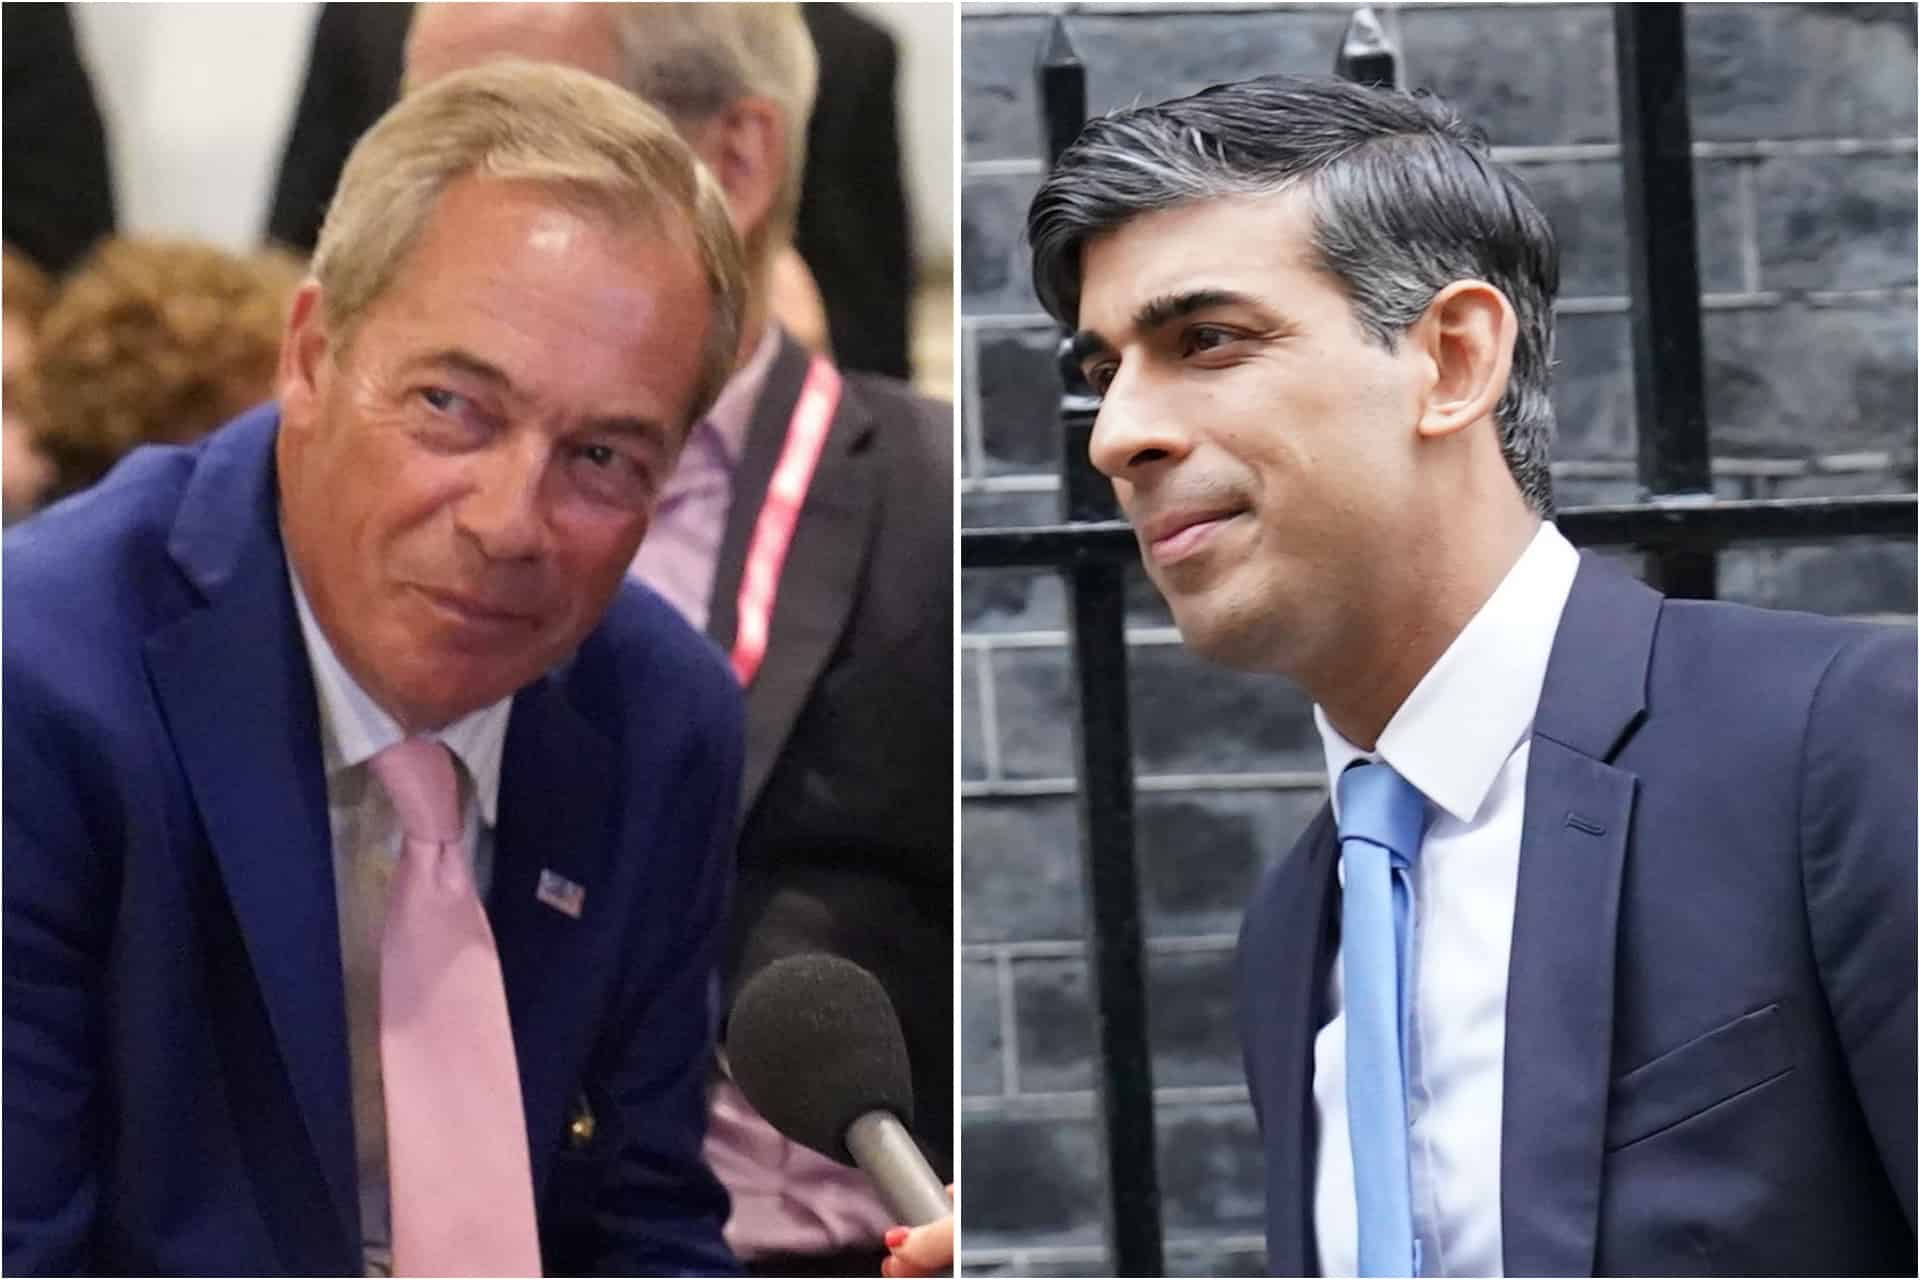 ‘No obvious alternative’ to Sunak on front bench – but 2019 voters see Farage as a future leader